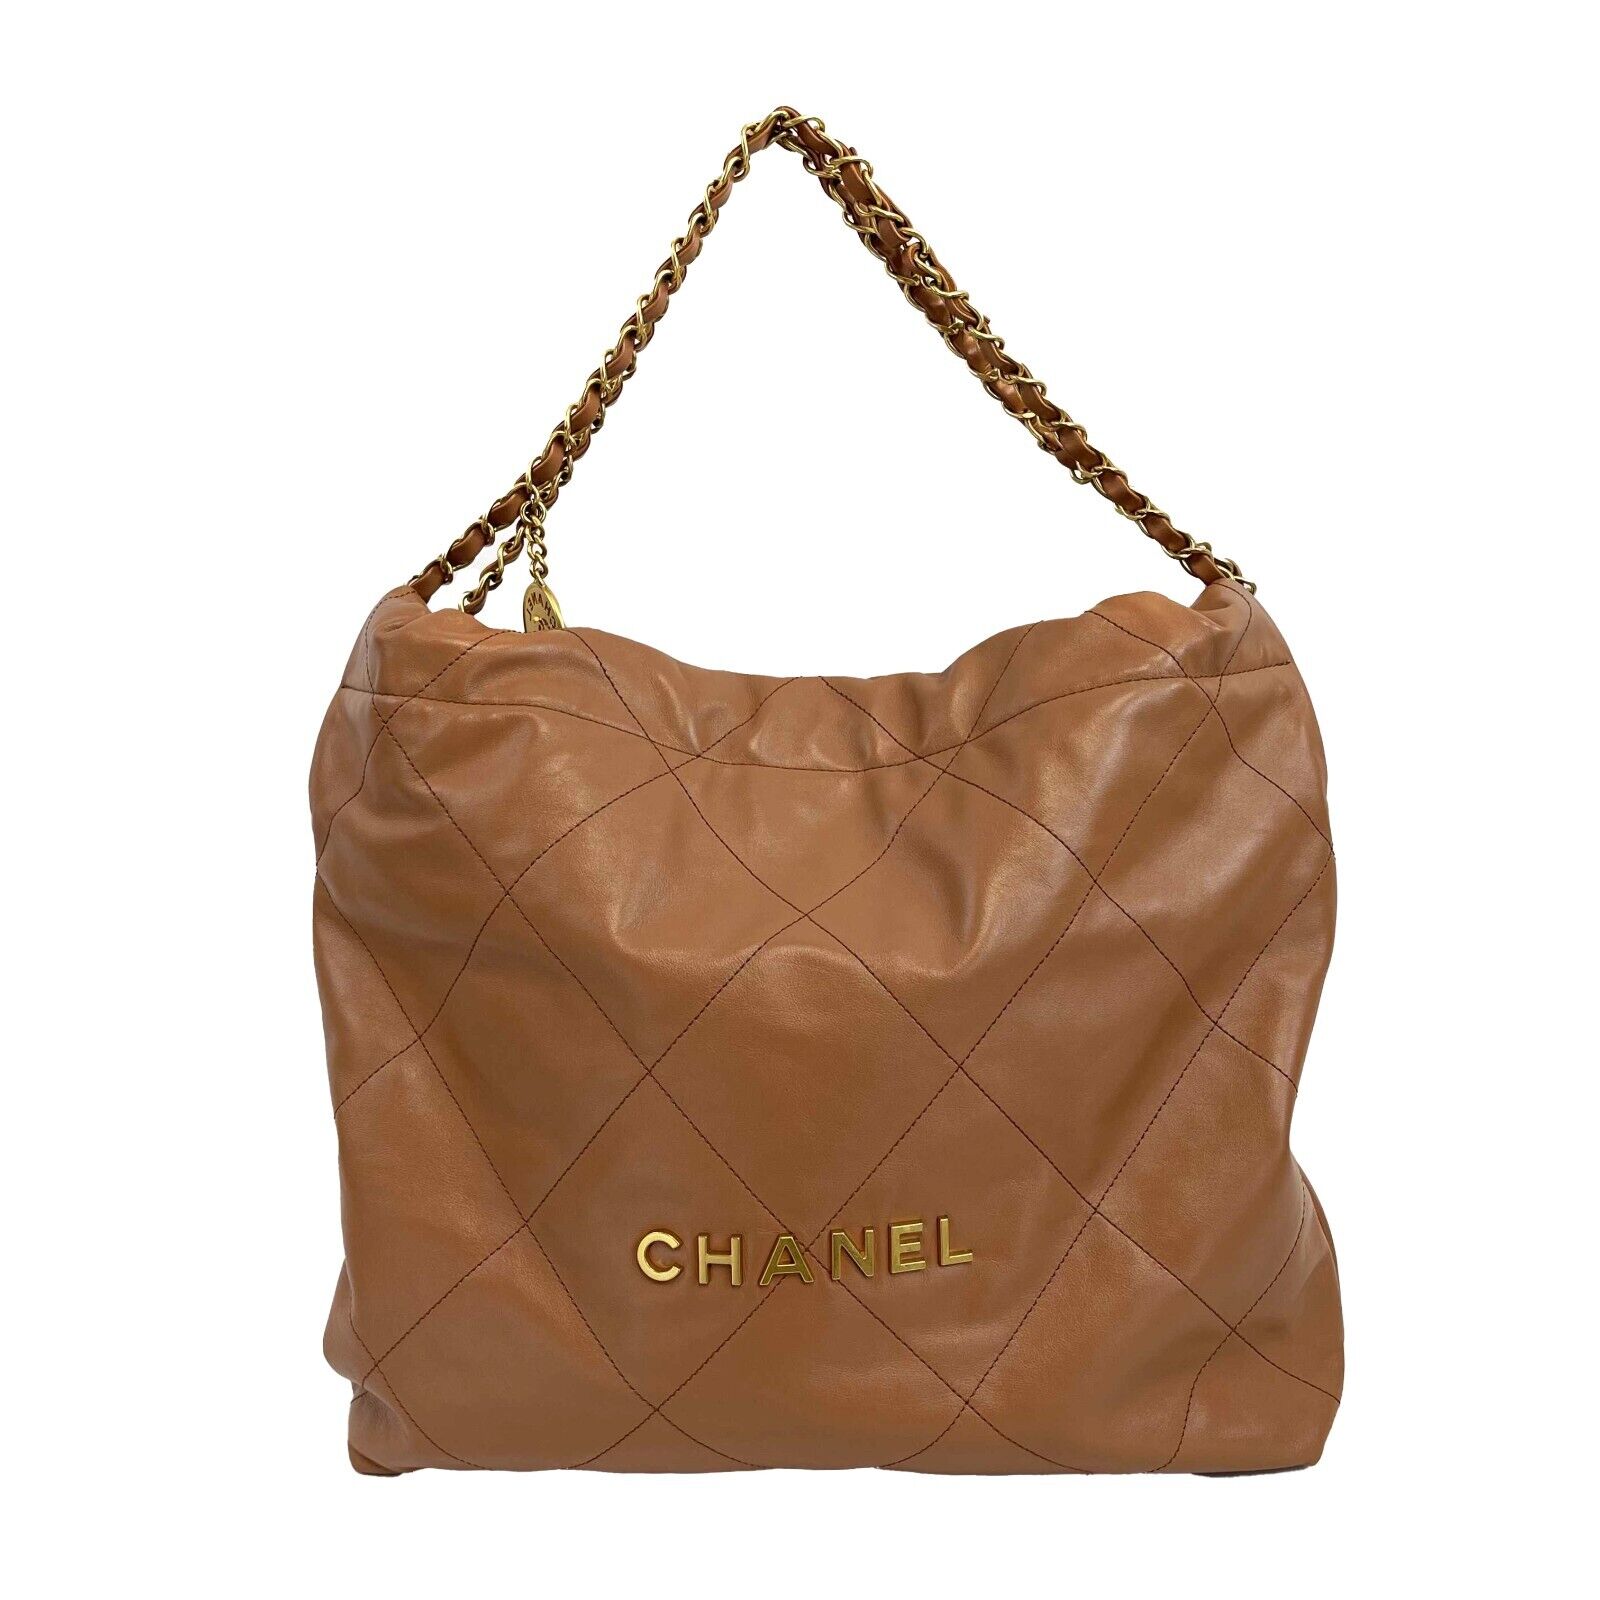 Chanel Drawstring Large Quilted Calfskin & Caviar Shopping Tote Bag Beige